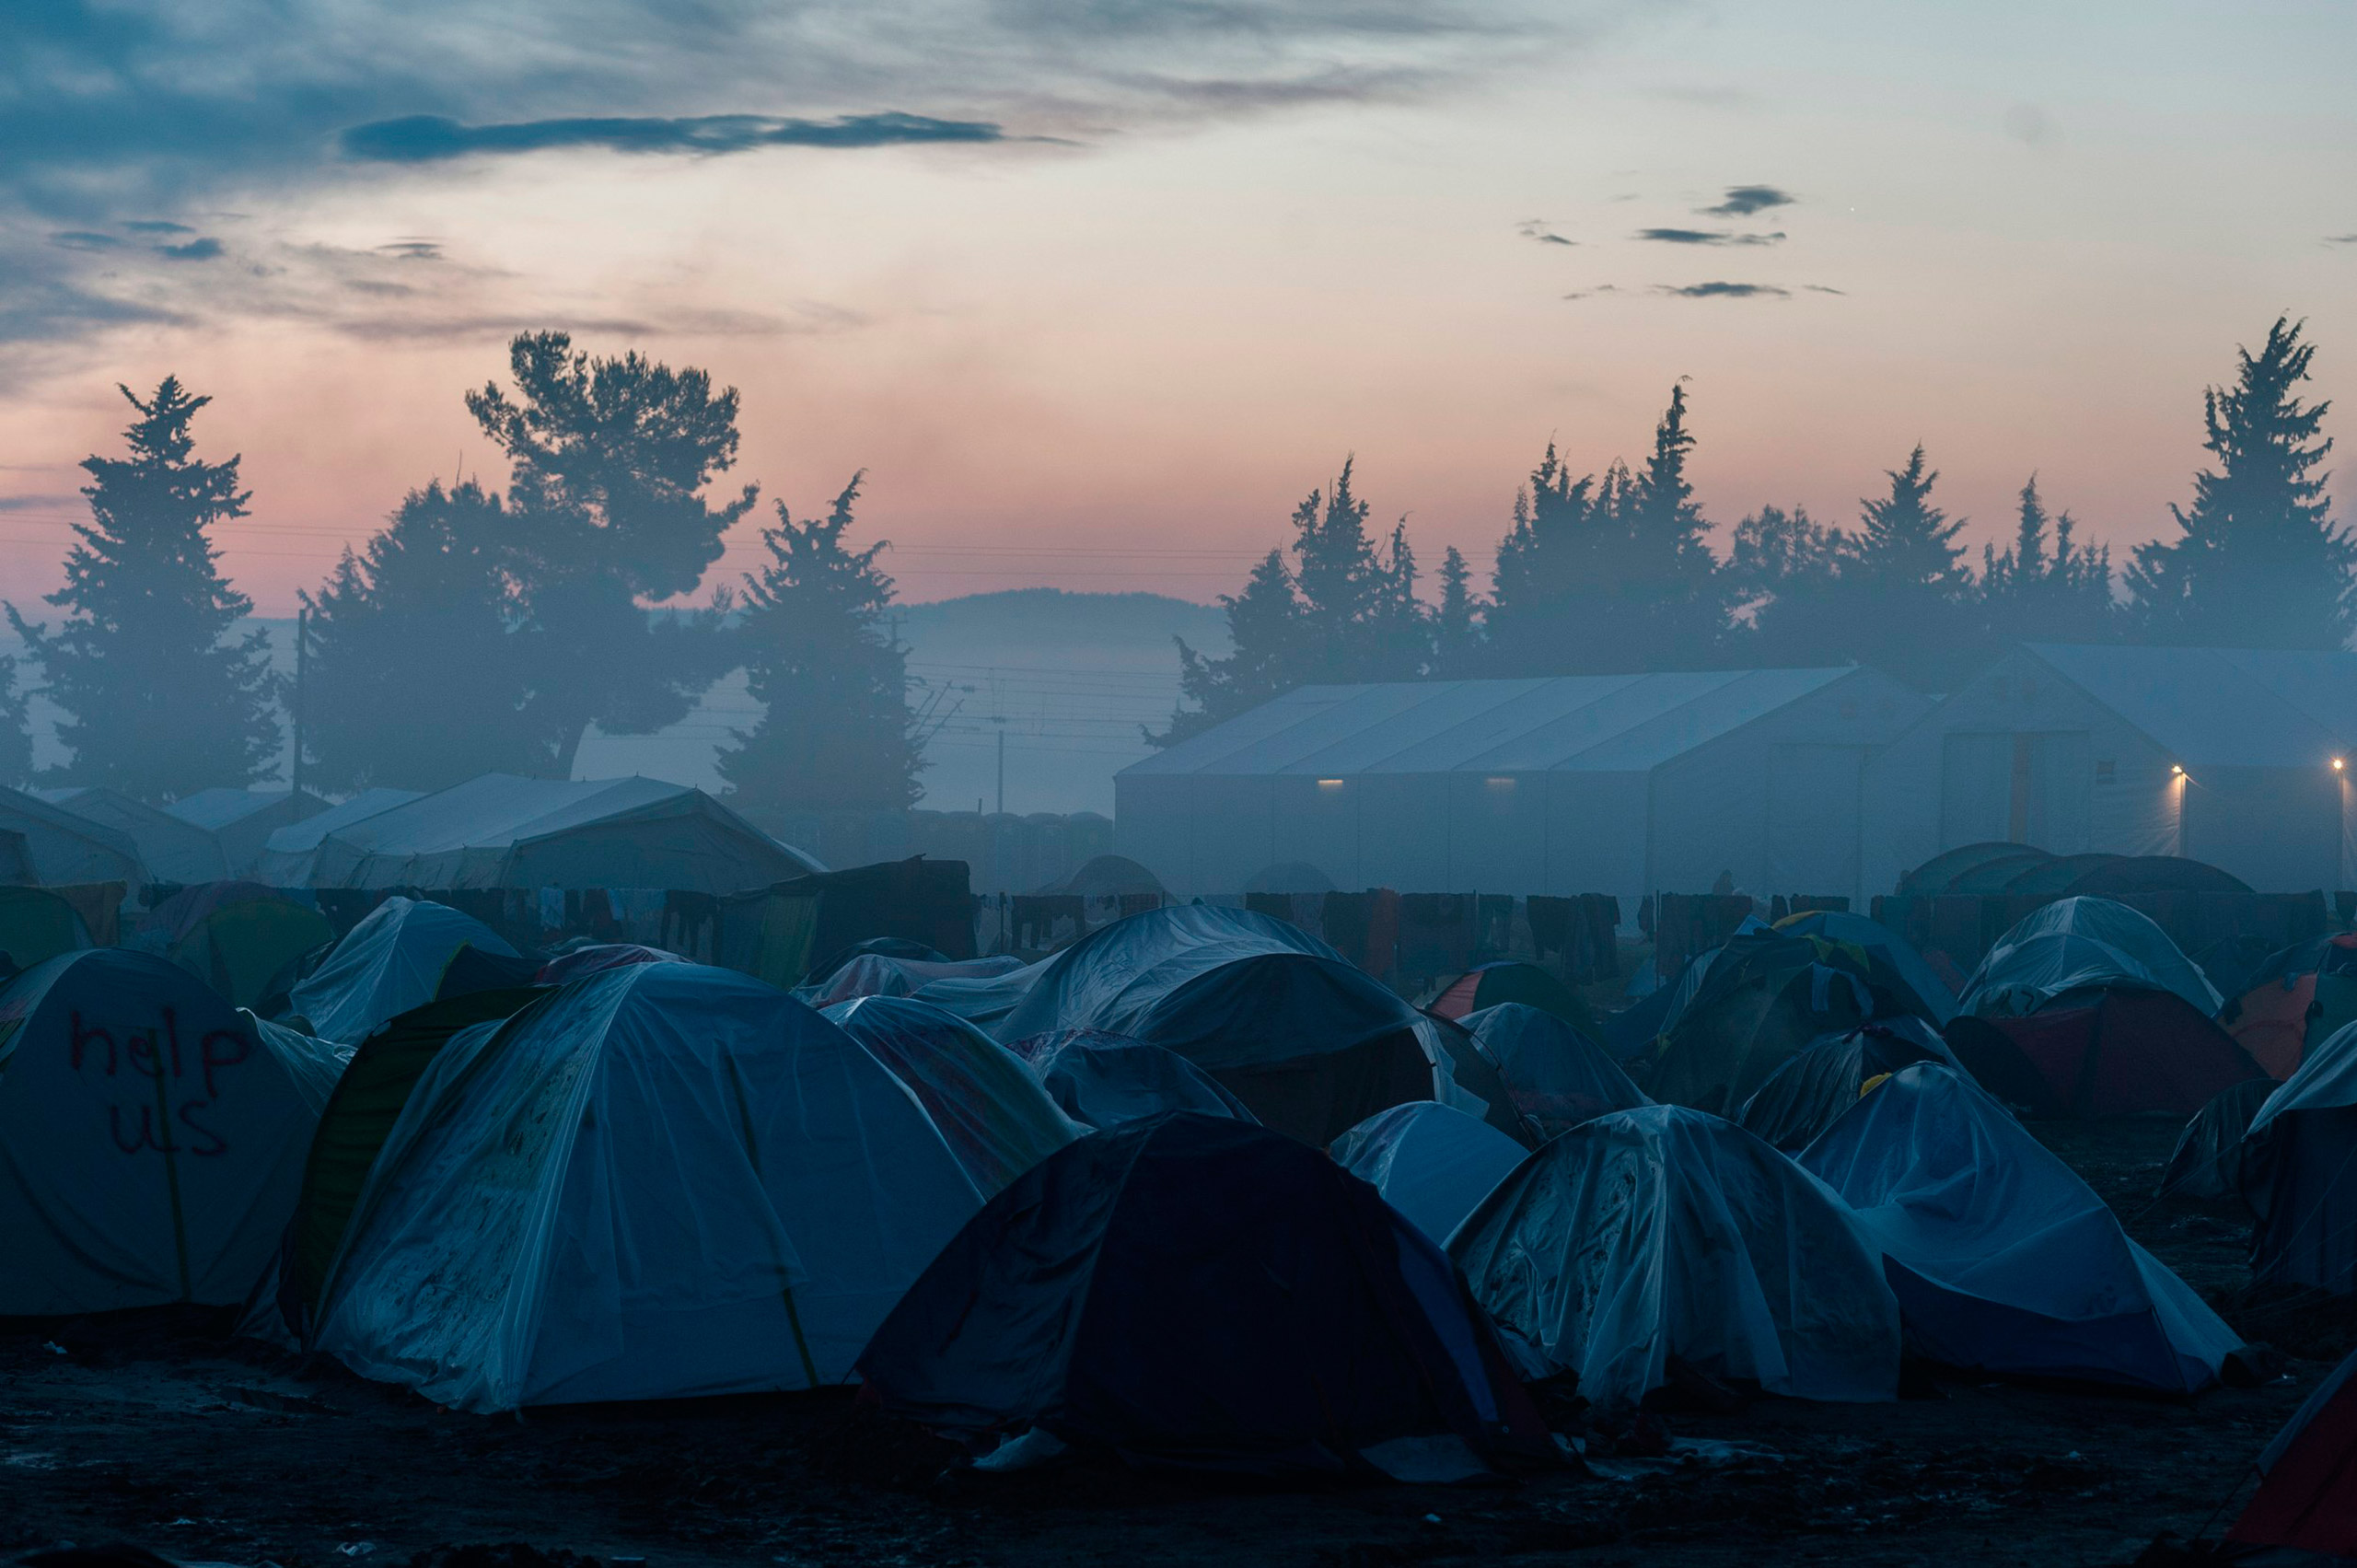 Fog engulfs a makeshift camp for migrants and refugees at the Greek-Macedonian border, near the Greek village of Idomeni, March 11, 2016. Markus Heine—NurPhoto/Corbis (Markus Heine&mdash;© Markus Heine/NurPhoto/Corbis)